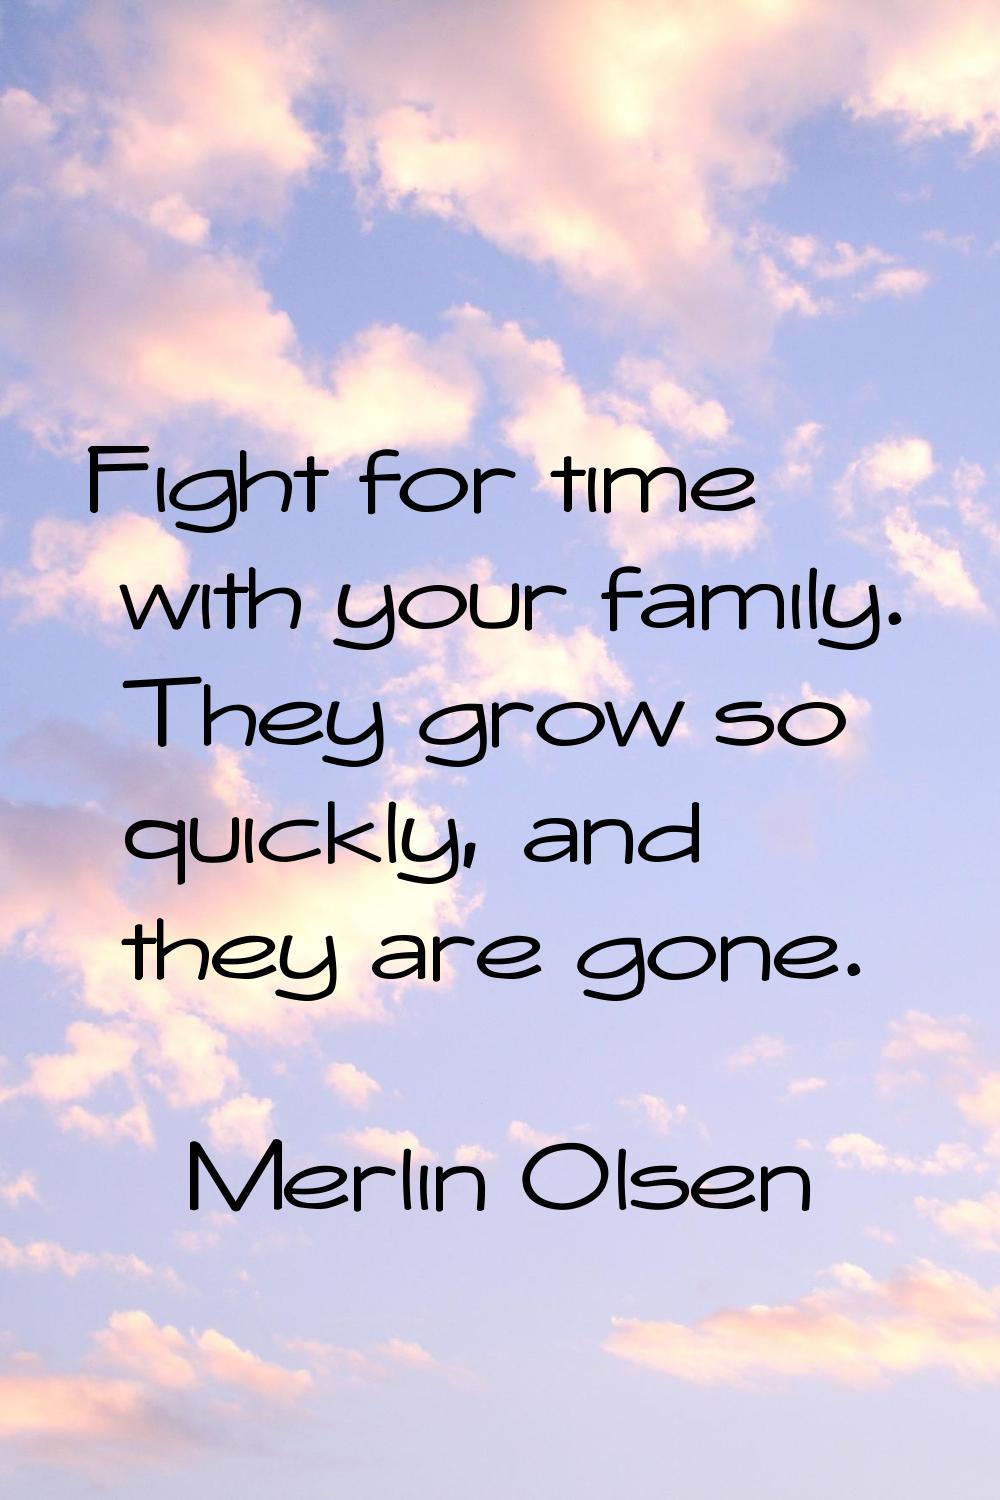 Fight for time with your family. They grow so quickly, and they are gone.